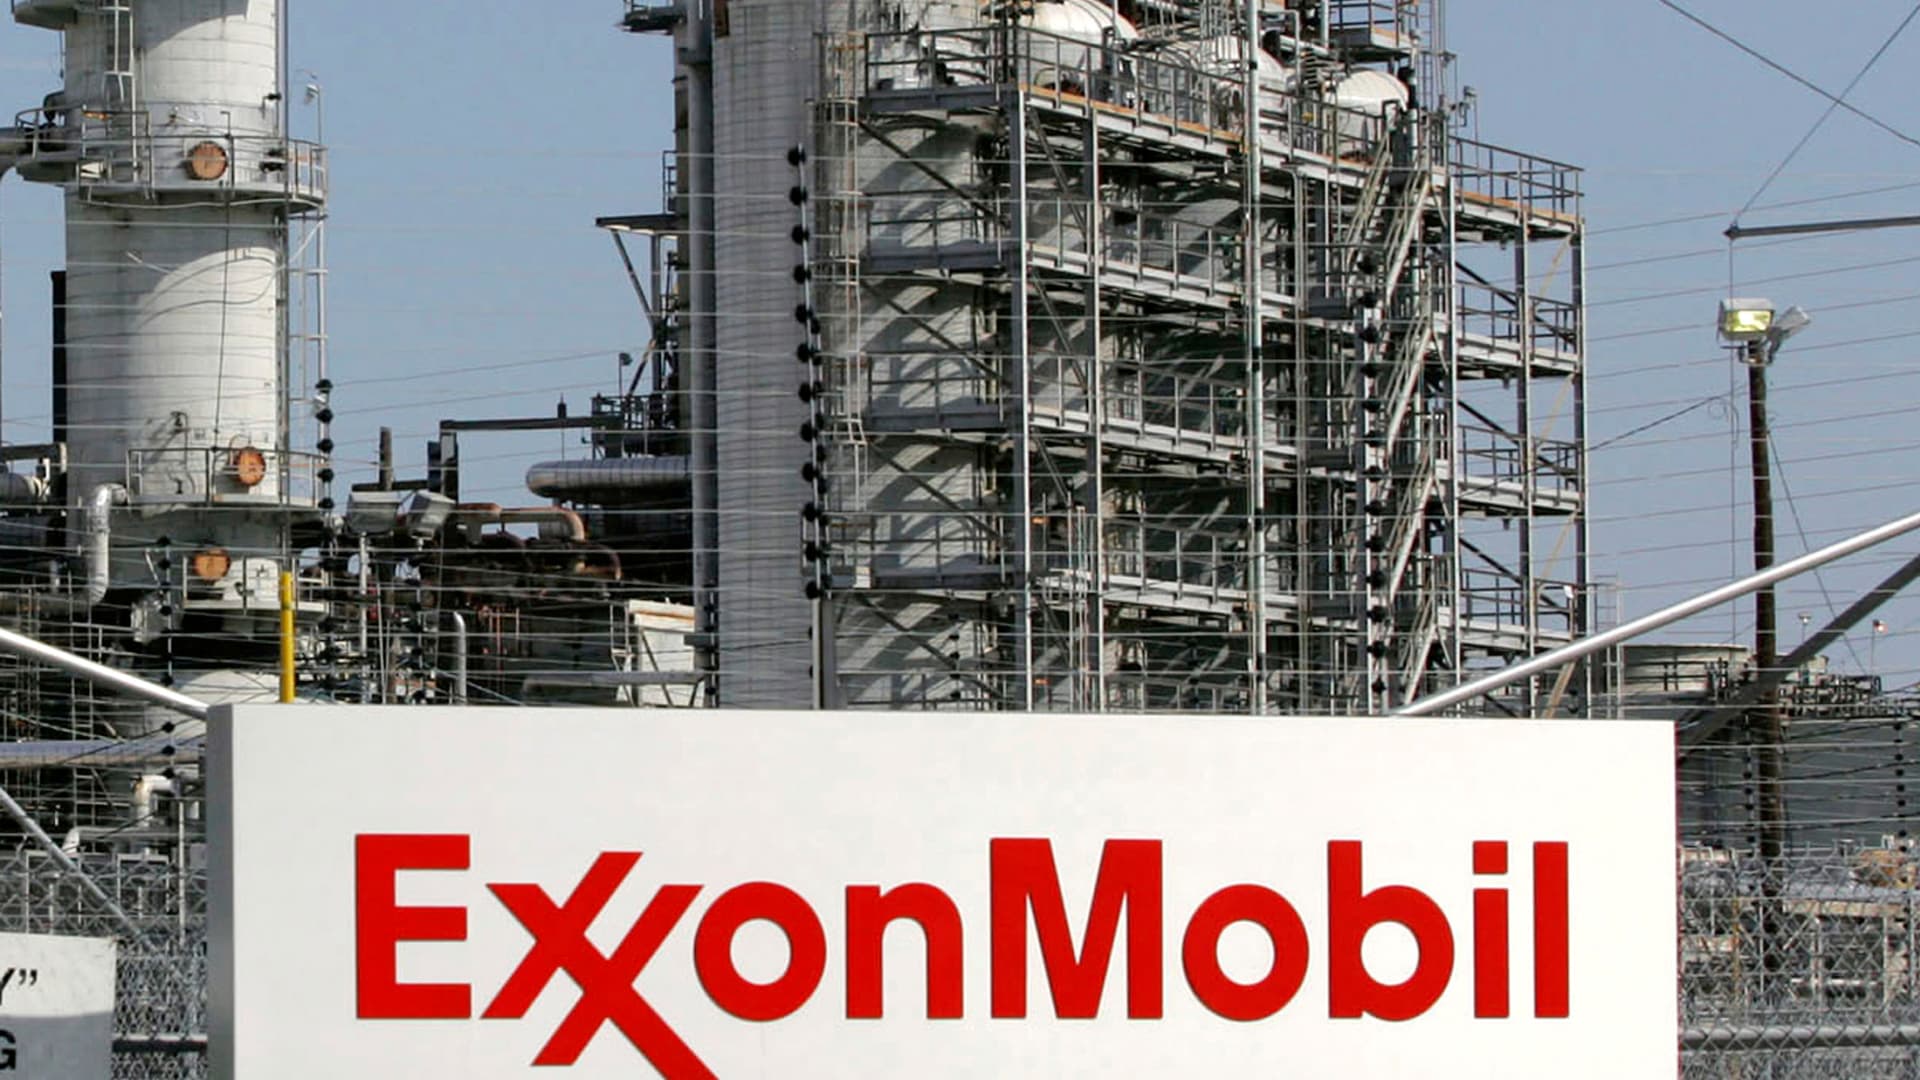 Engine No. 1 wins at least 2 Exxon board seats as activist pushes for climate strategy change